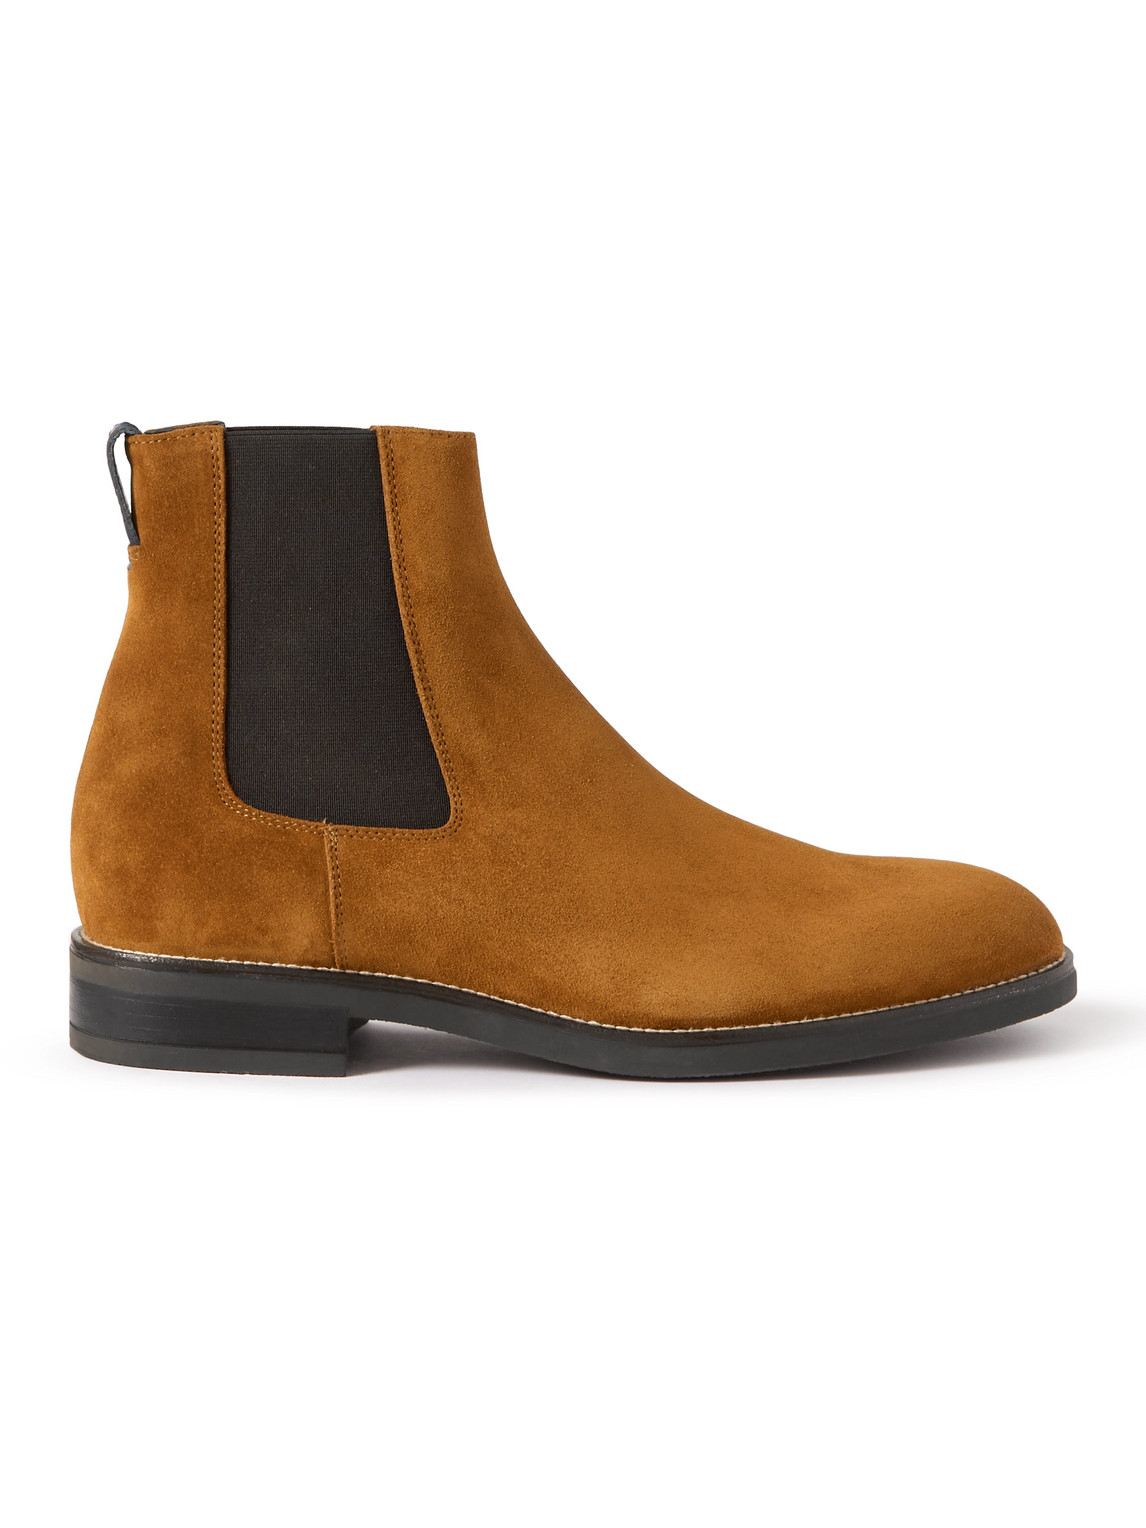 PAUL SMITH CANON SUEDE CHELSEA BOOTS